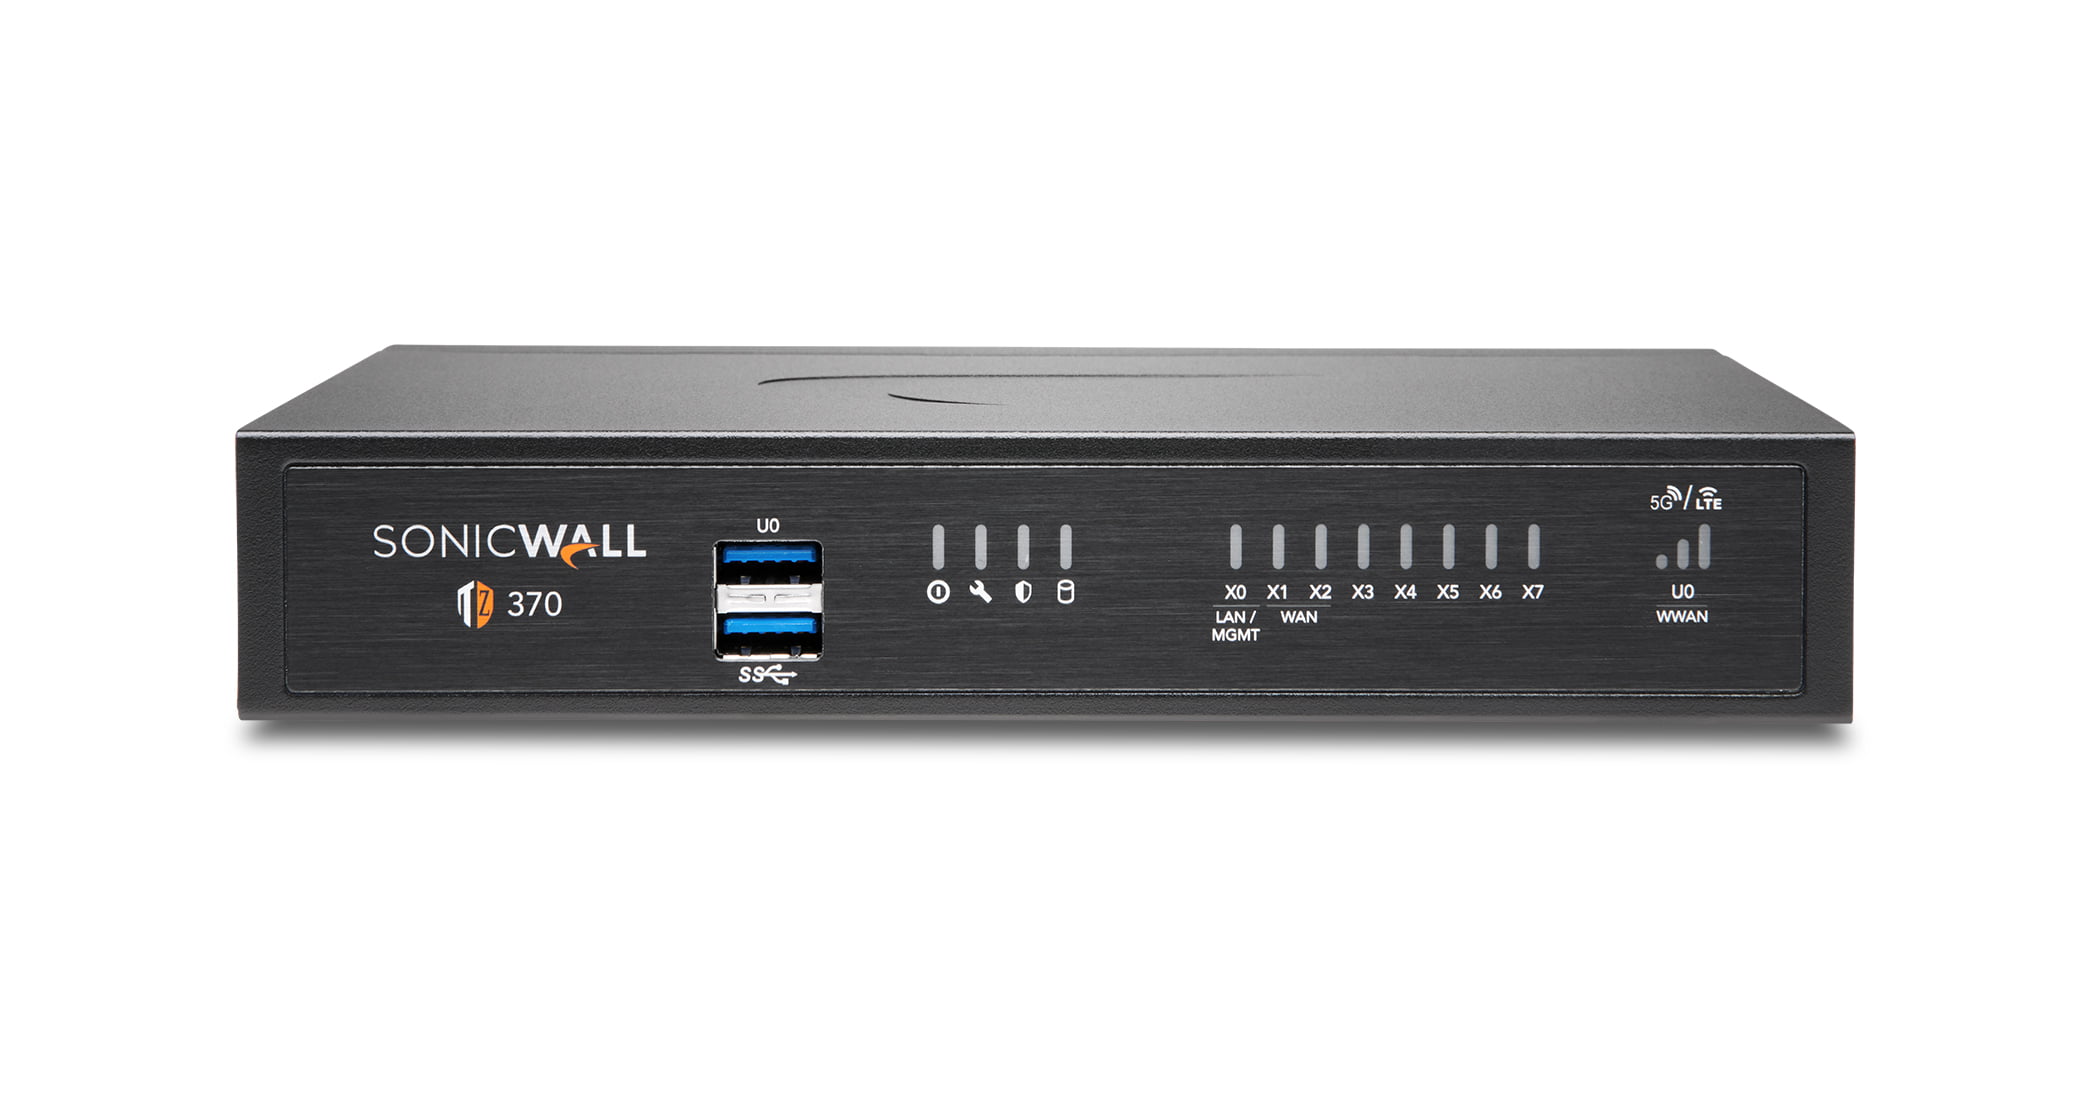 SONICWALL TZ370 + THREAT PROTECTION SERVICE SUITE (TPSS)